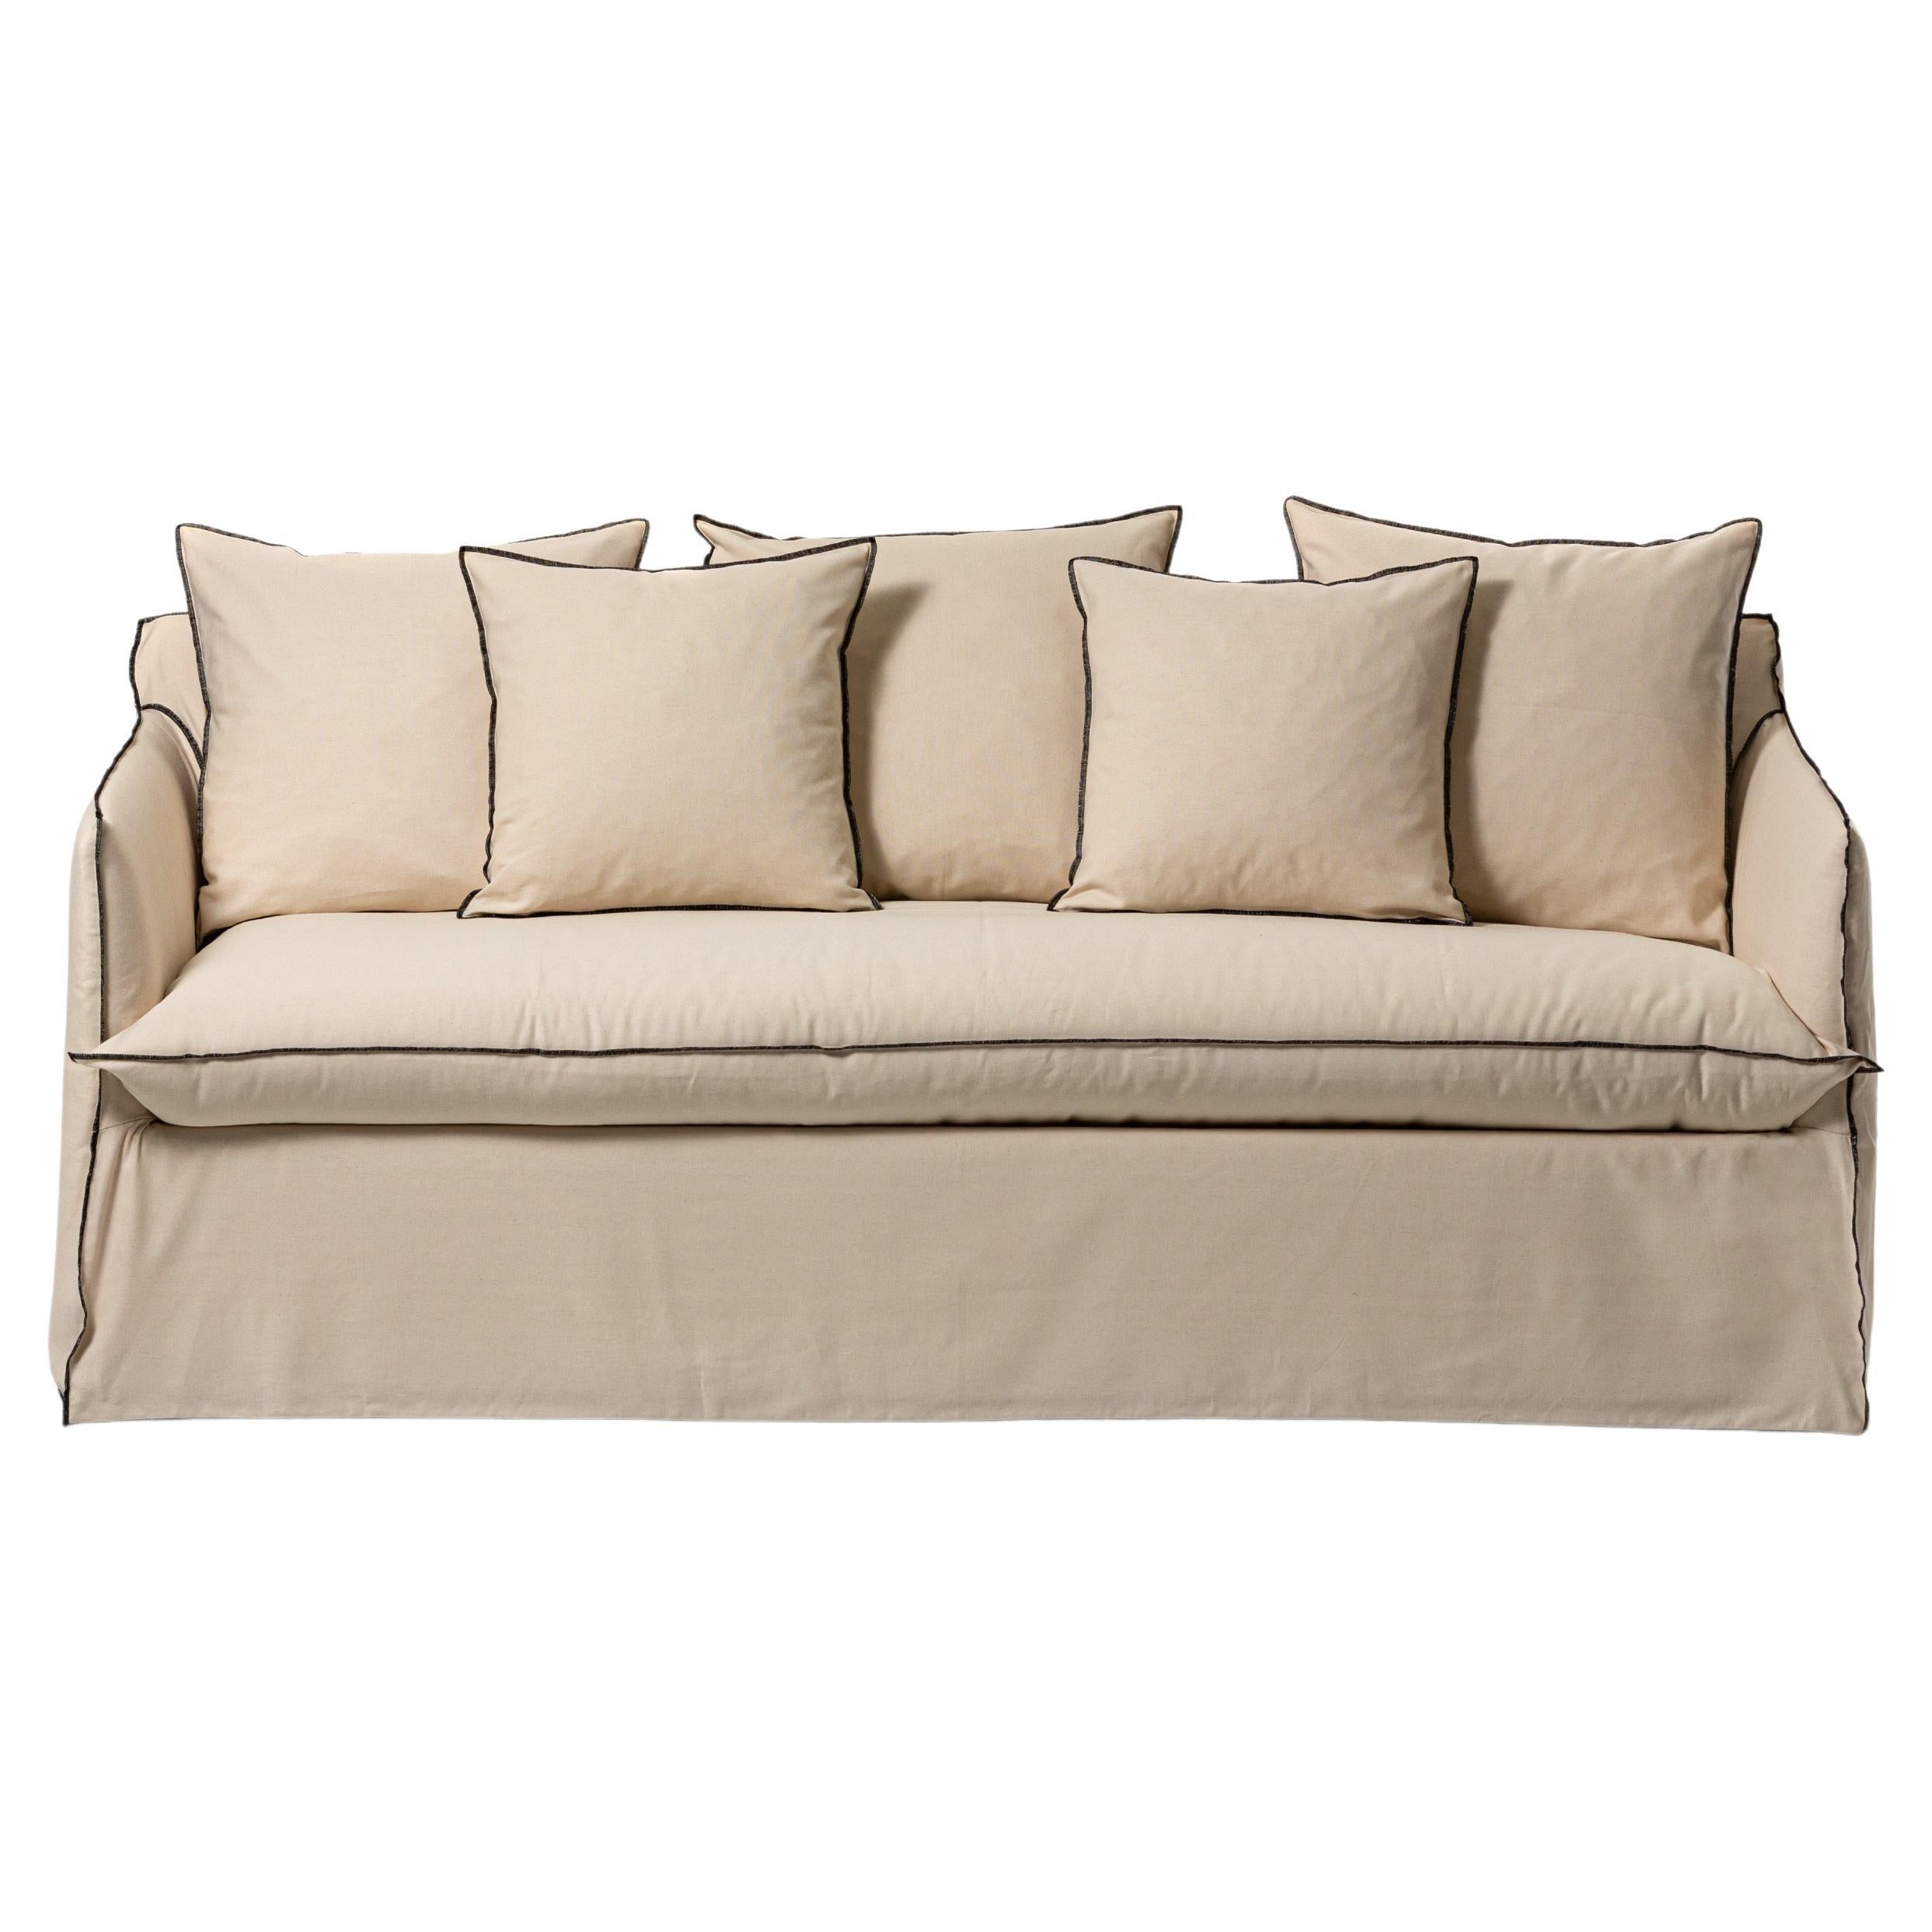 Gervasoni Ghost 15 Sofa Bed in Rene Upholstery by Paola Navone